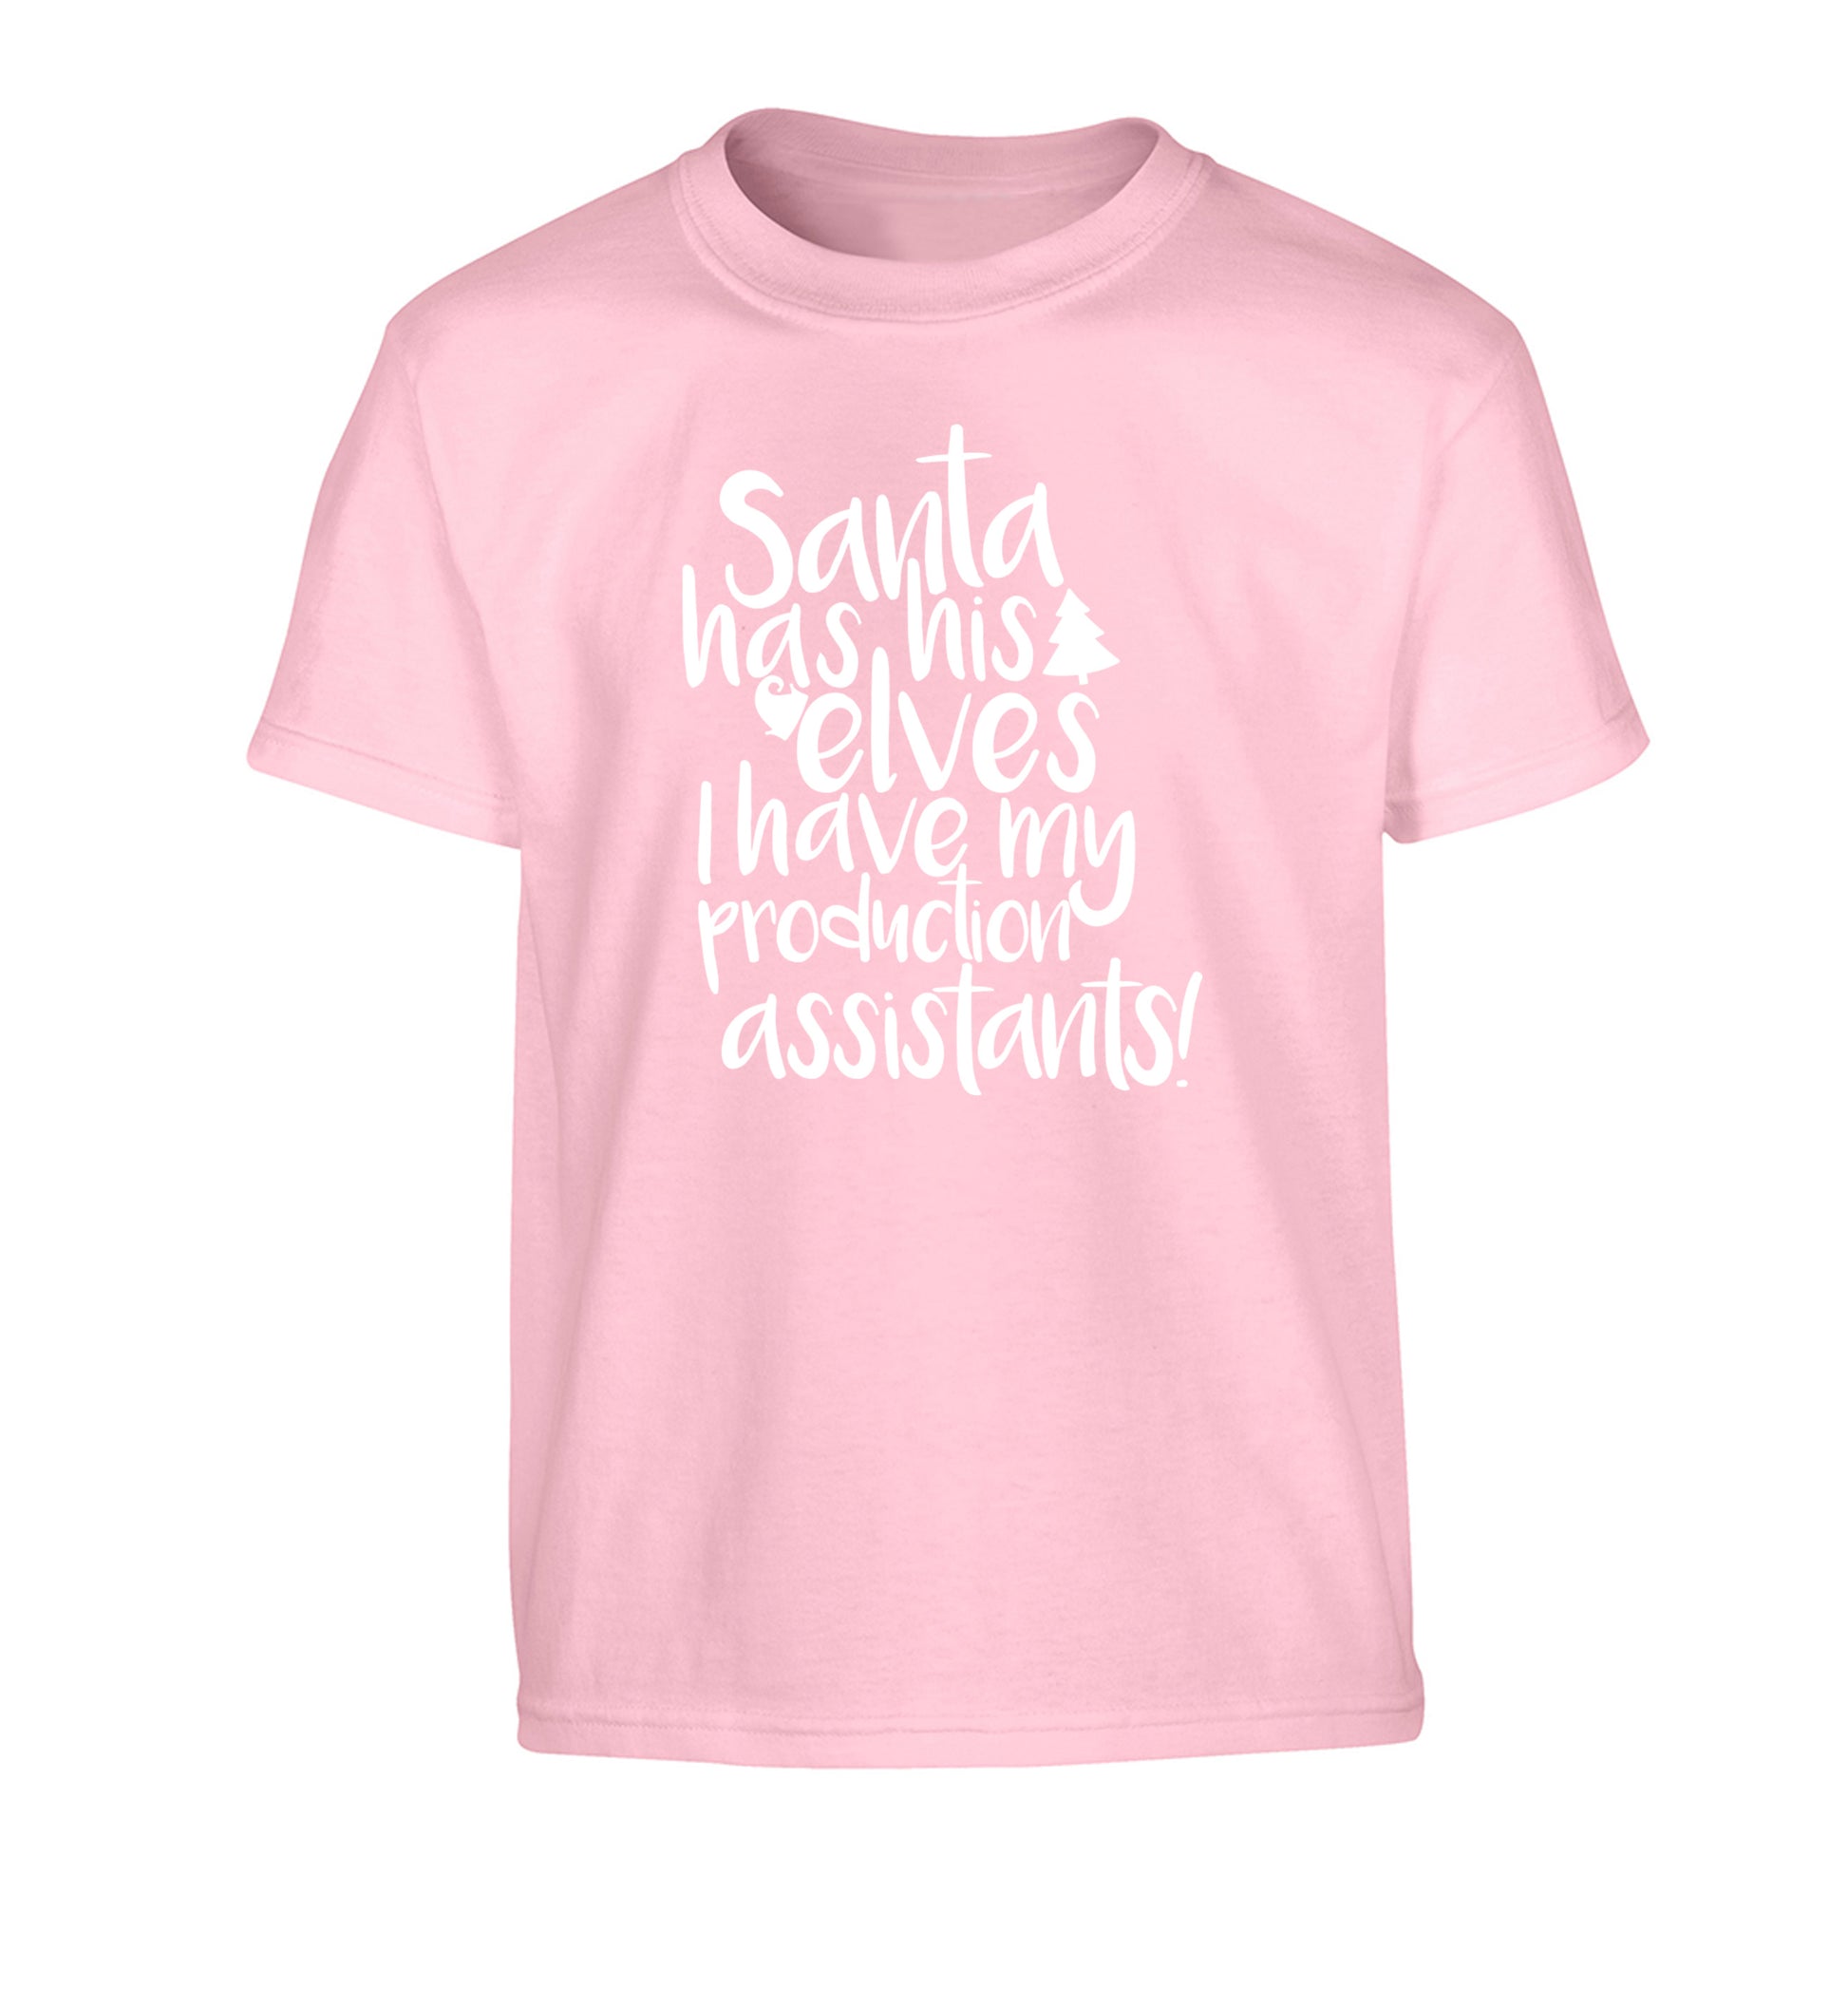 Santa has his elves I have my production assistants Children's light pink Tshirt 12-14 Years